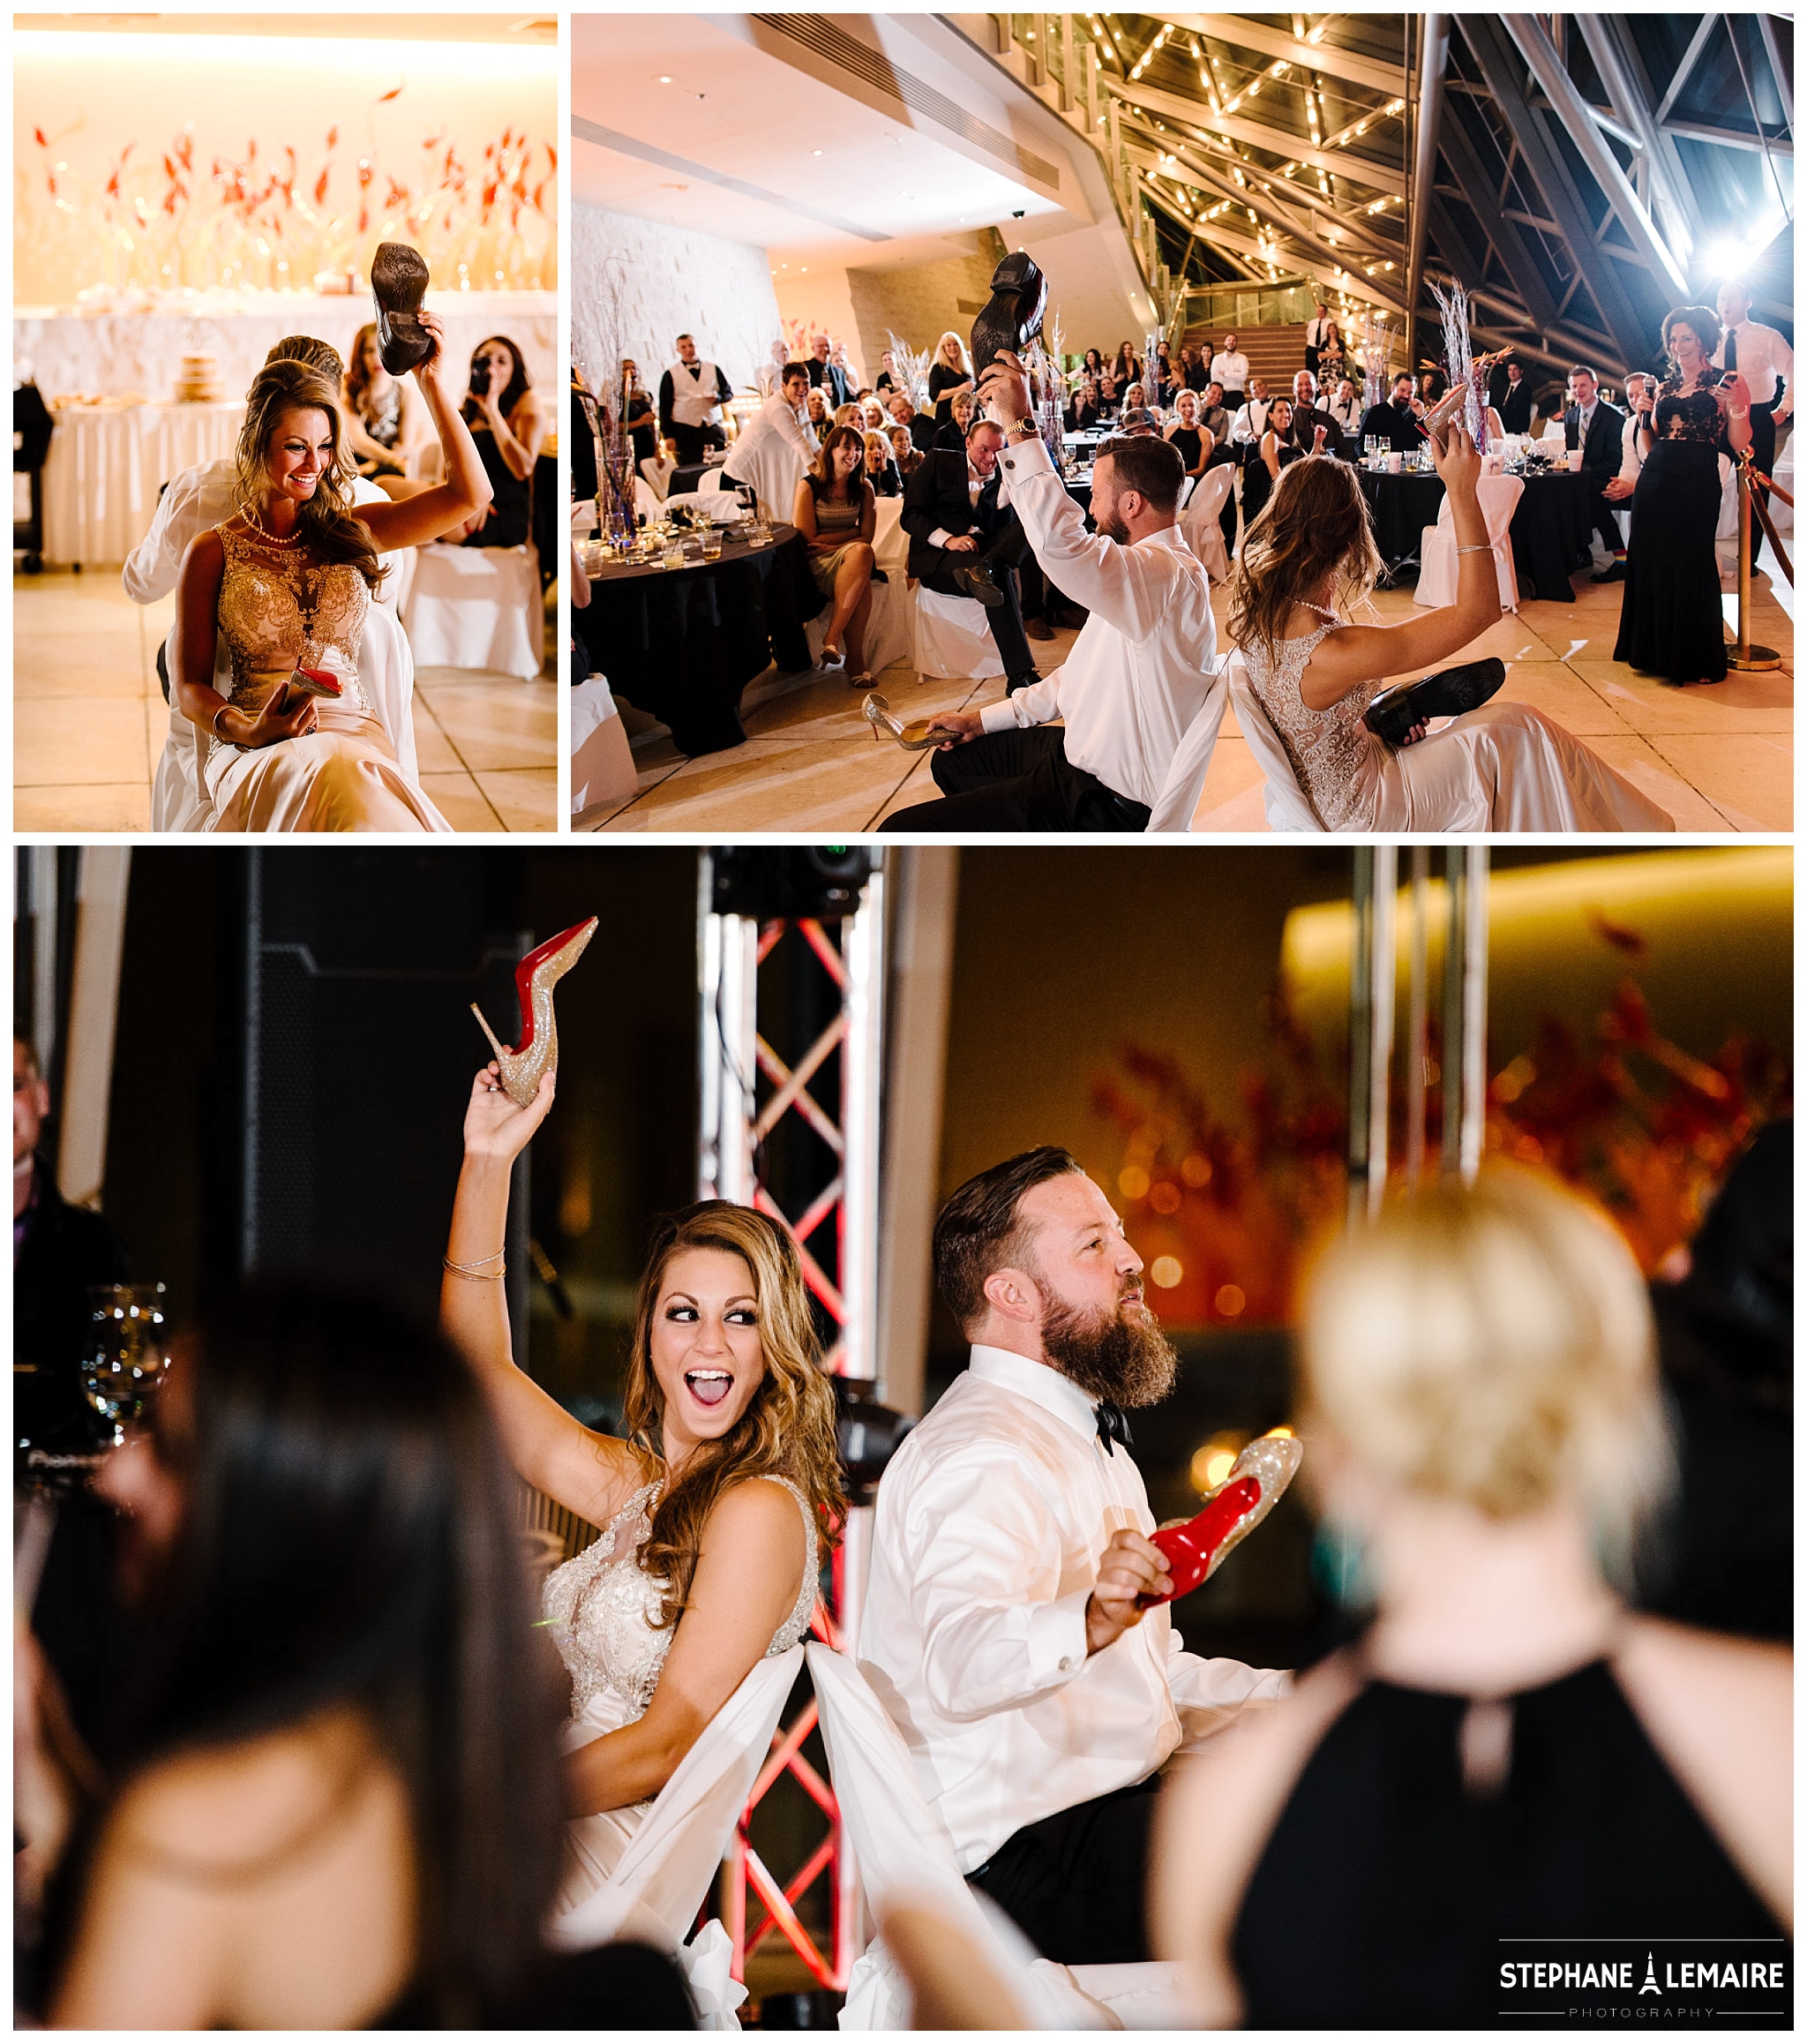 Spencer theater wedding in Ruidoso wedding reception by Stephane Lemaire Photography 